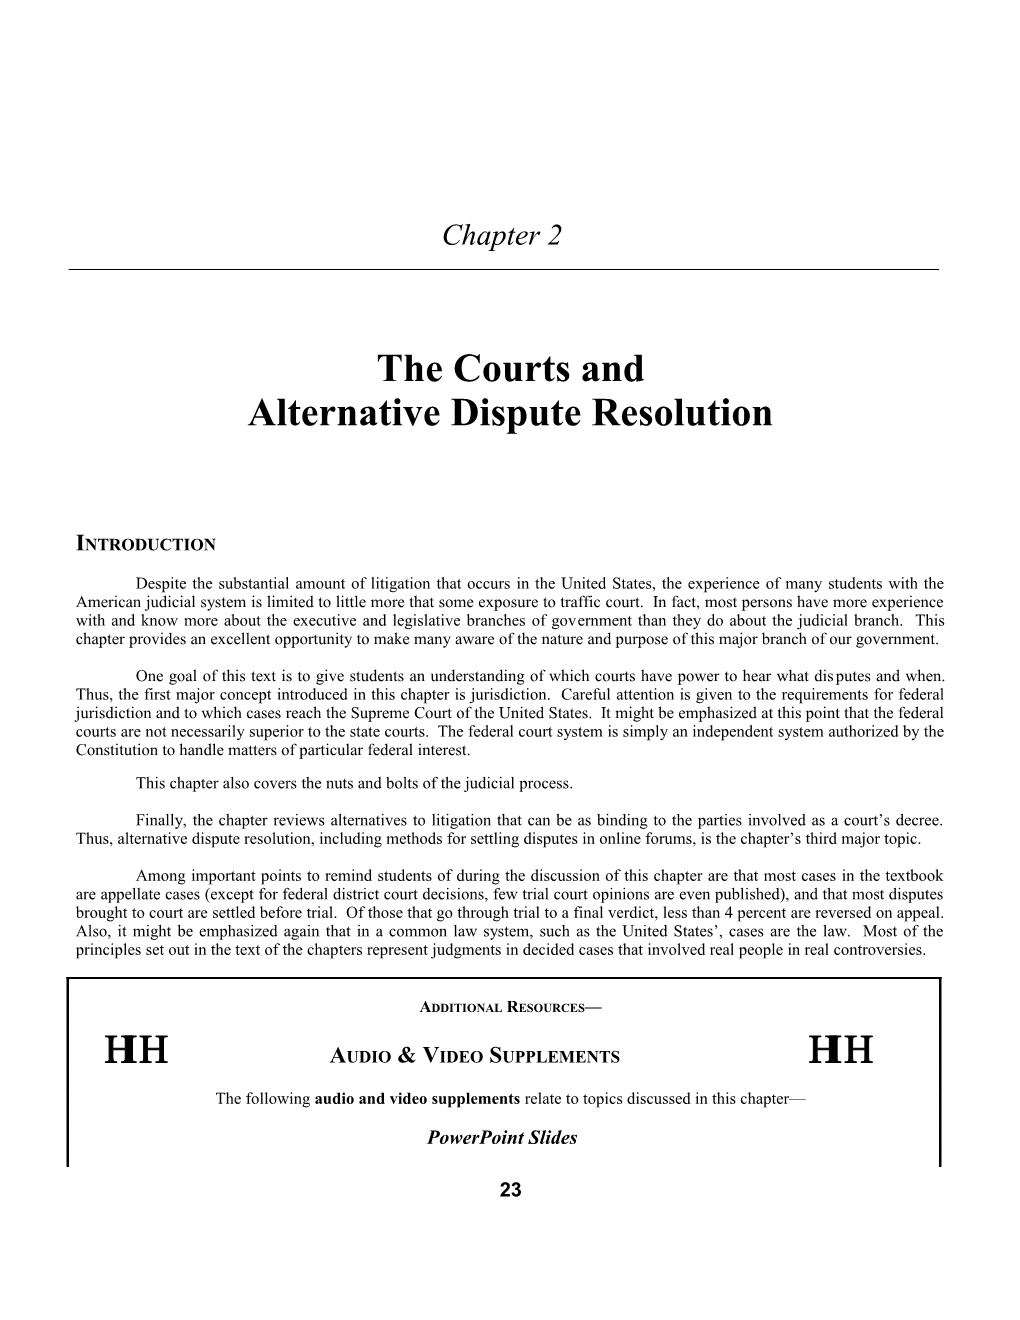 Chapter 2: the Courts and Alternative Dispute Resolution 1